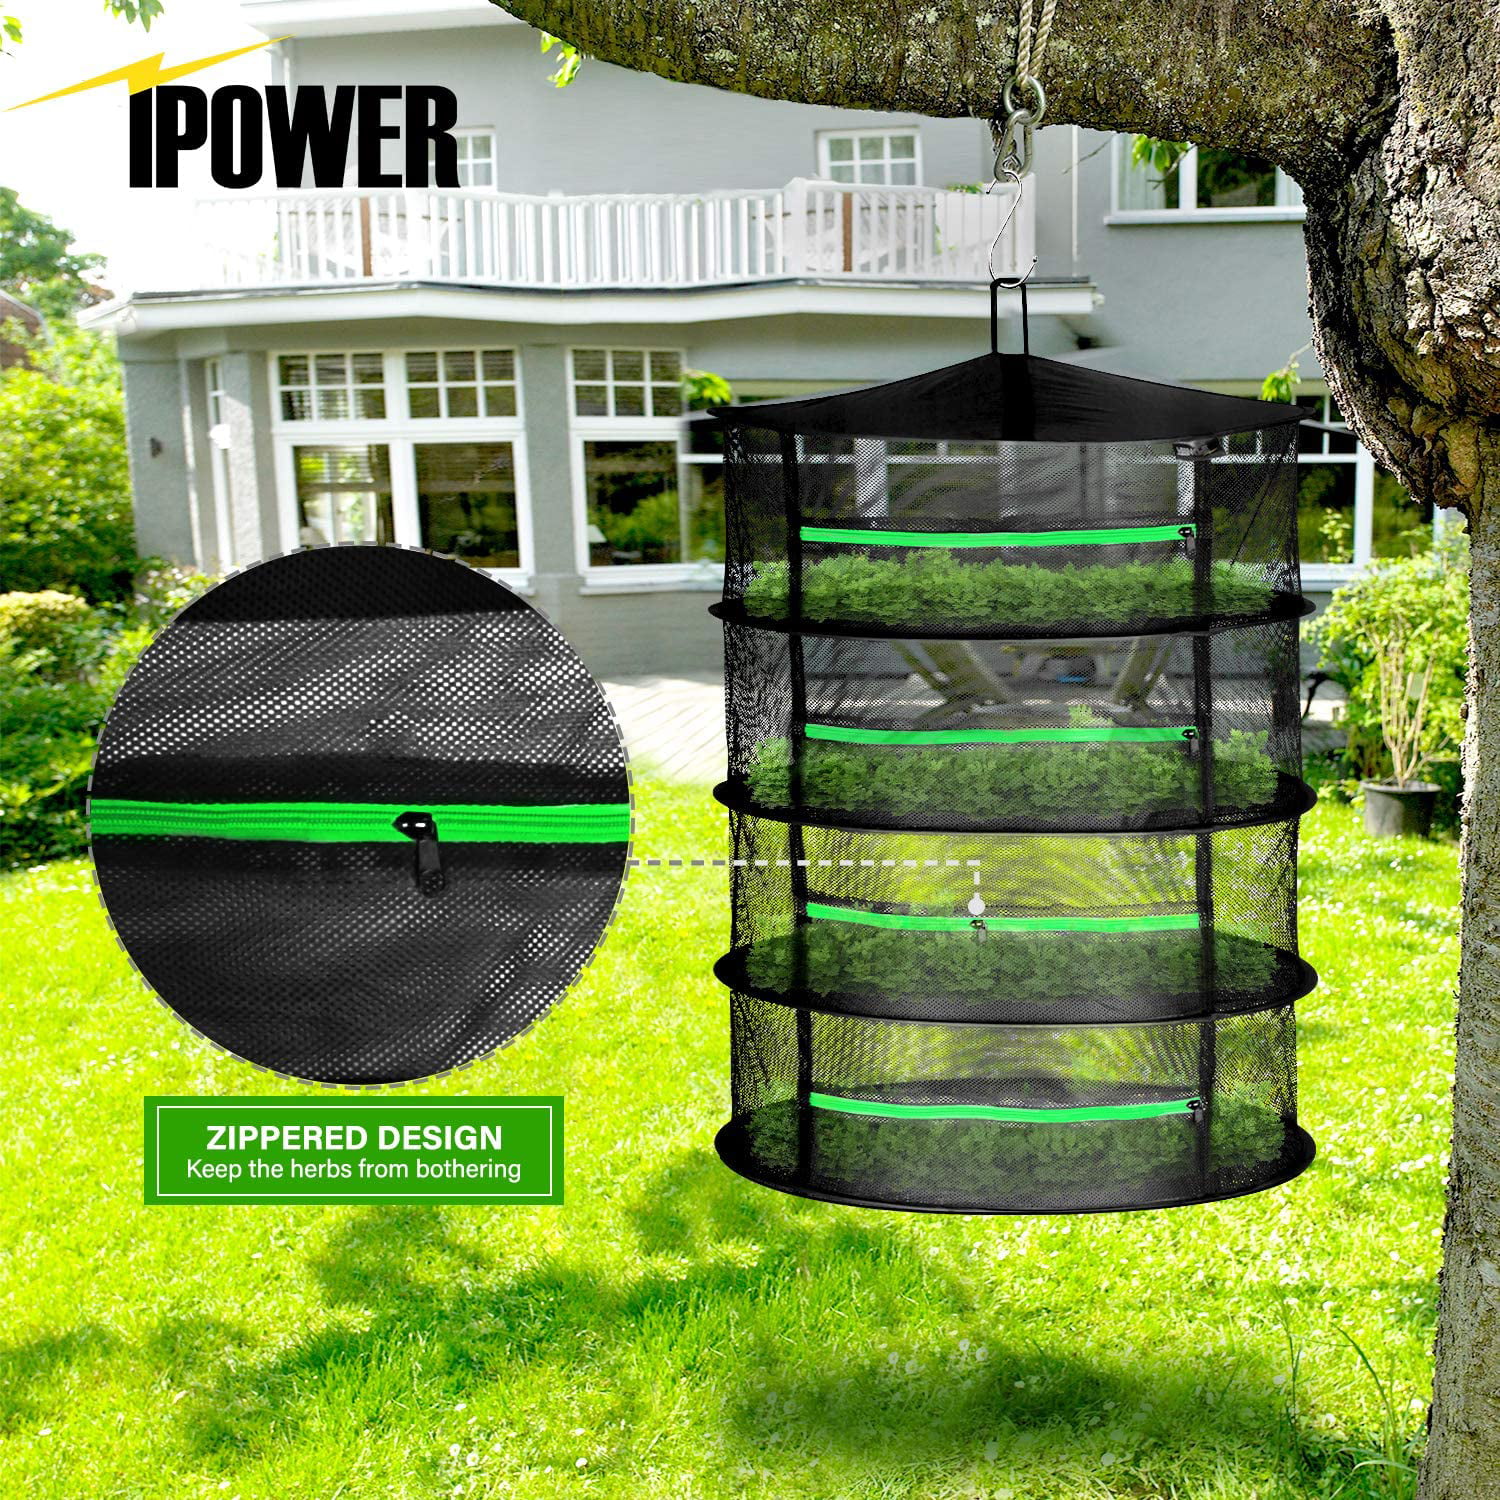 2Pack 2 Feet Herb Drying Rack Folding 4 Layer Collapsible Black Mesh with Green Zipper Carry Bag Hanging Dryer Net for Plant Hydroponics Flowers Vegetables 2Black 4Layer